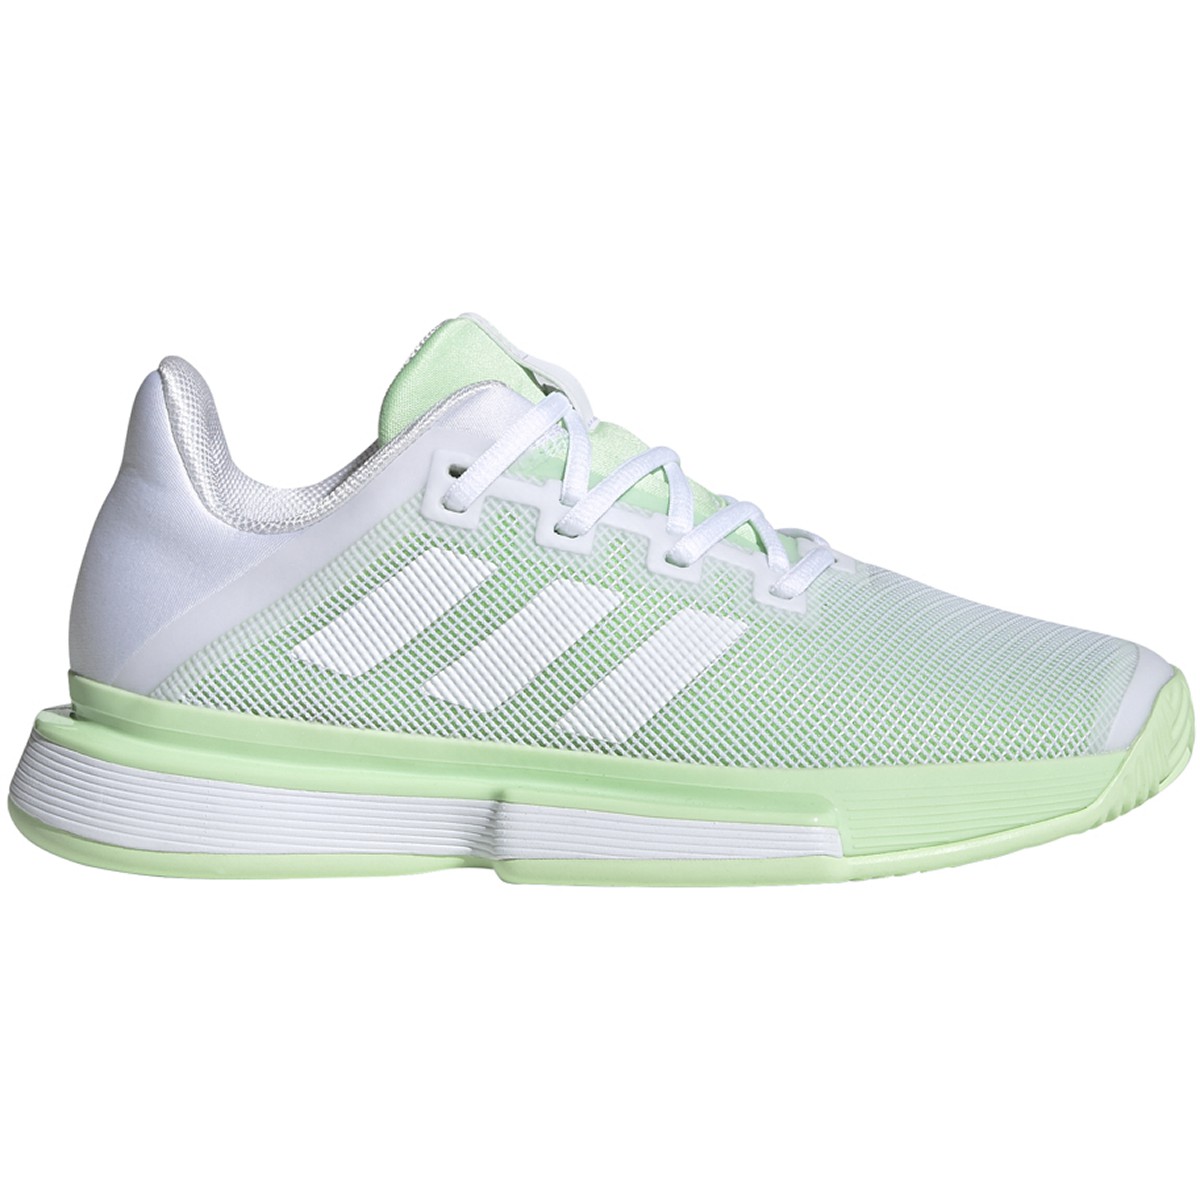 Adidas Women&amp;apos;s SoleMatch Bounce Tennis Shoes (White/Glow Green)